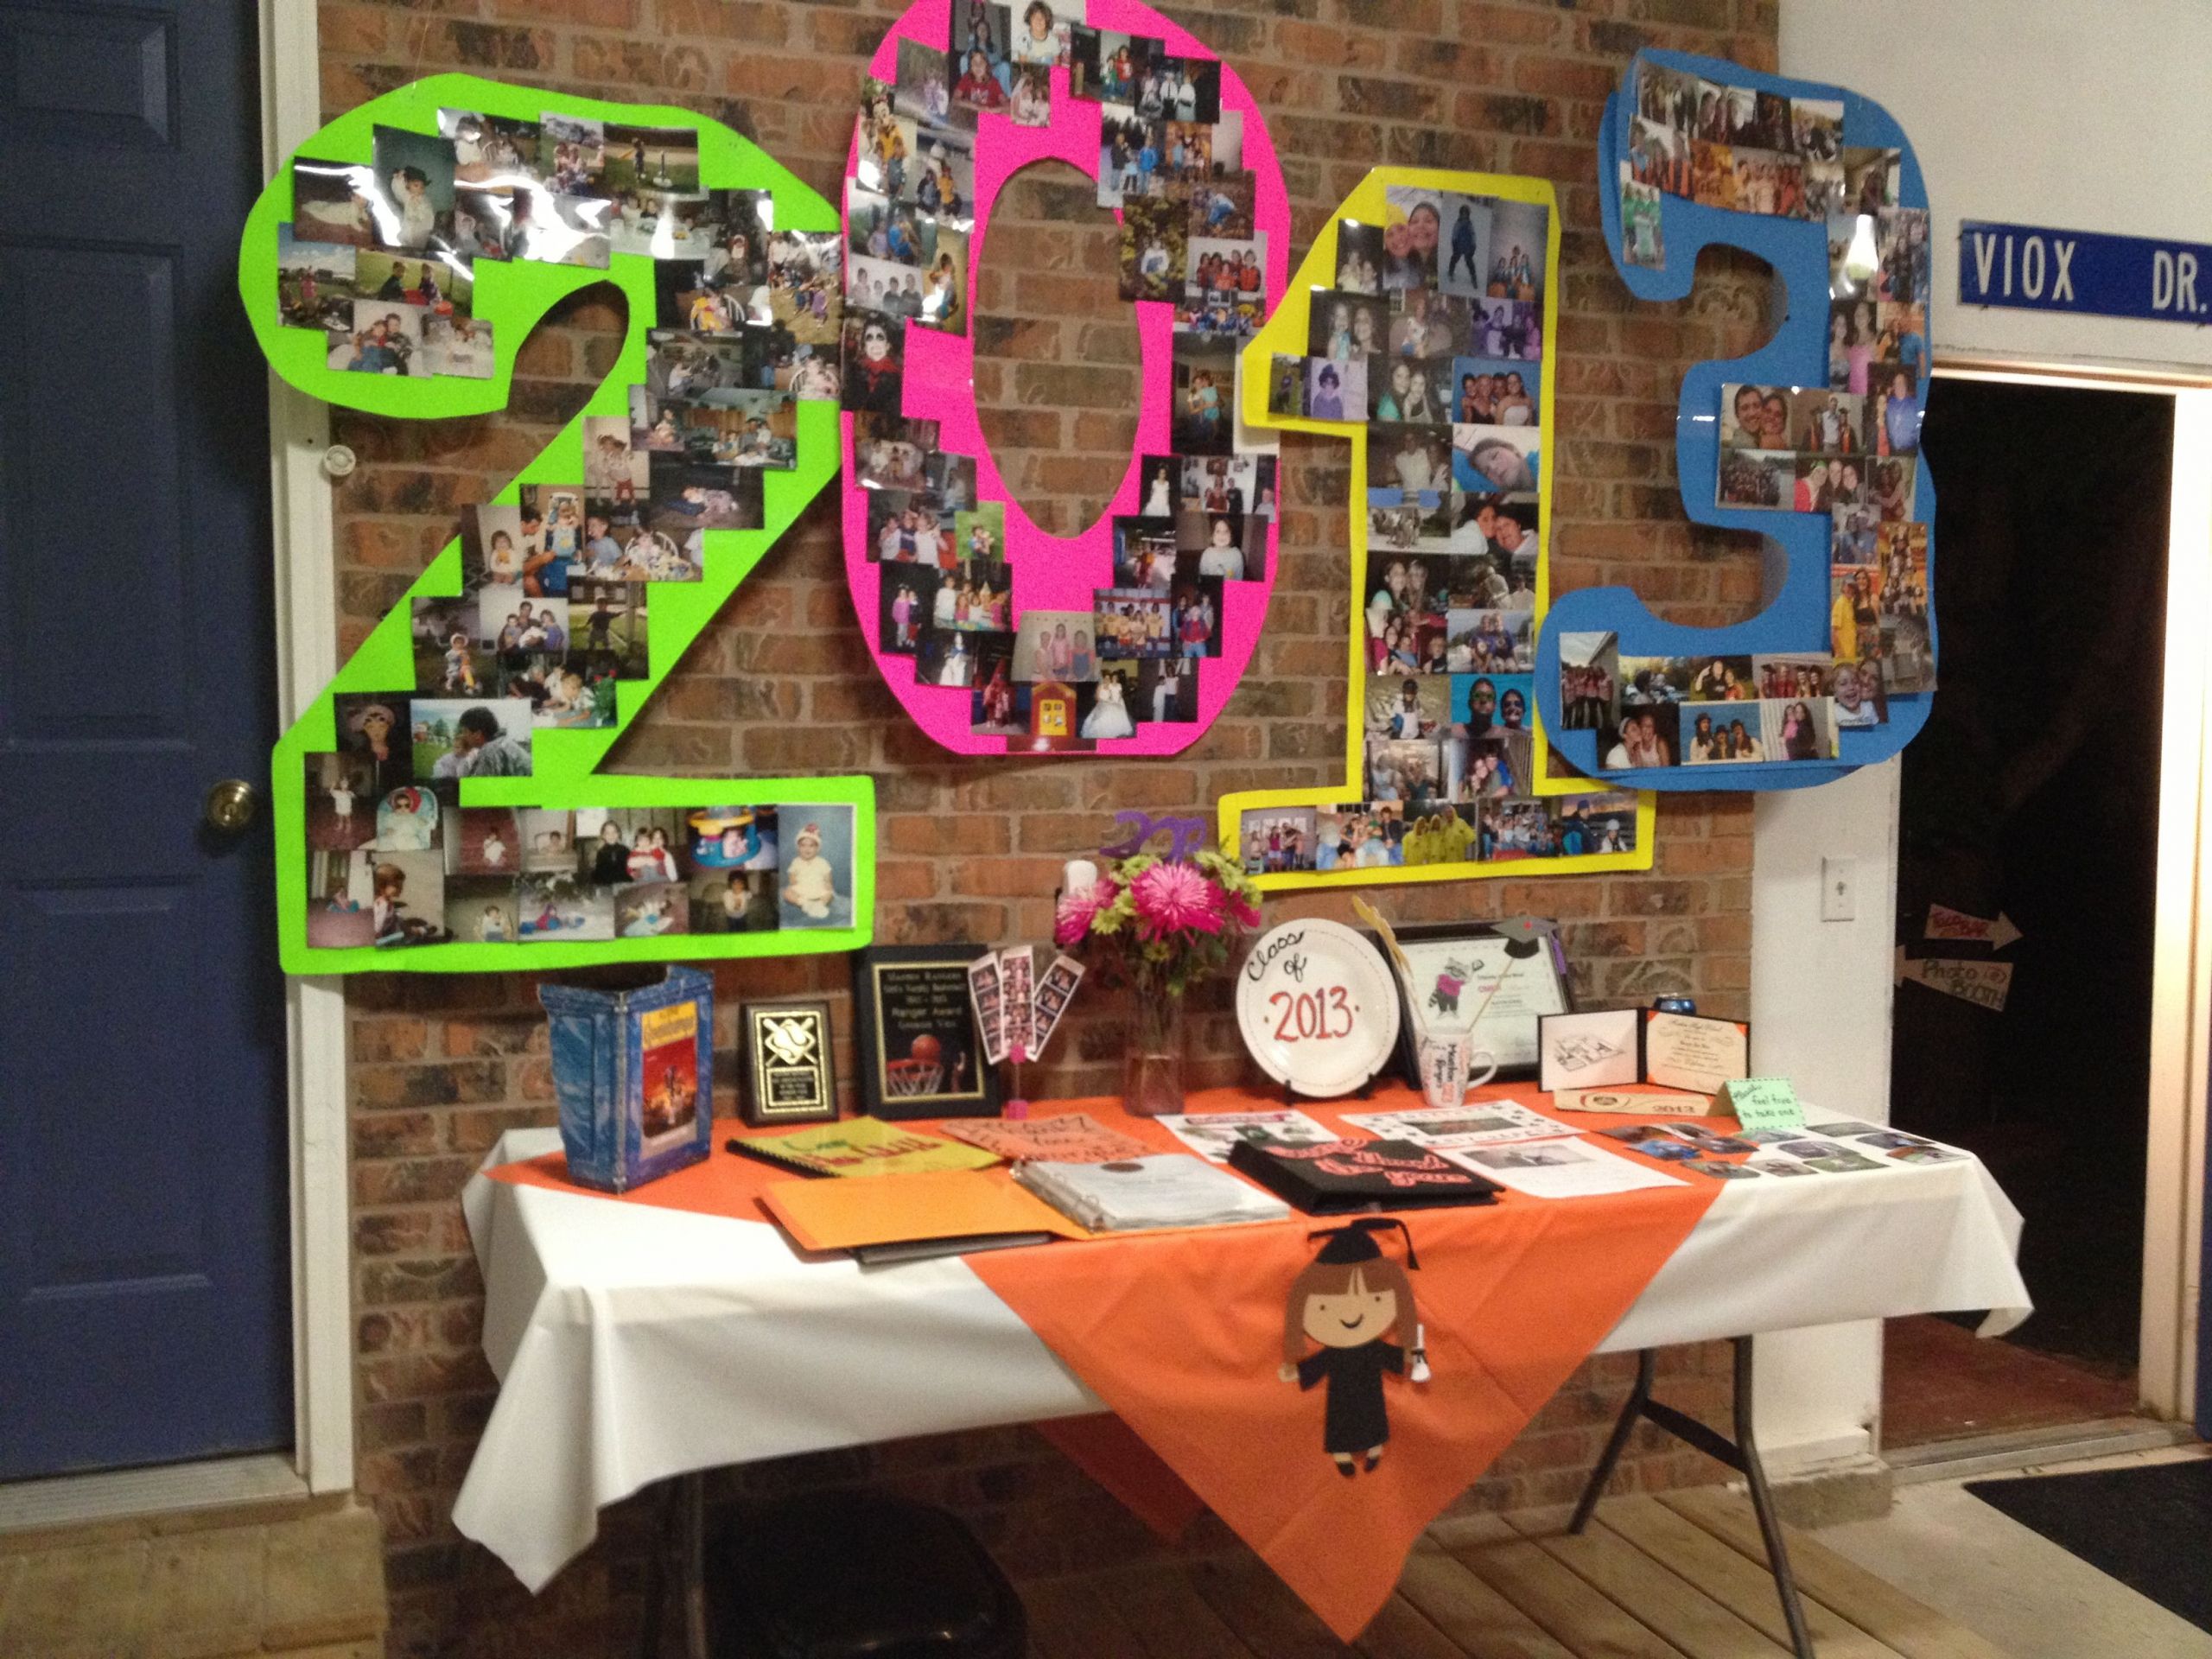 Fifth Grade Graduation Party Ideas
 Graduation party decorations The numbers are created out